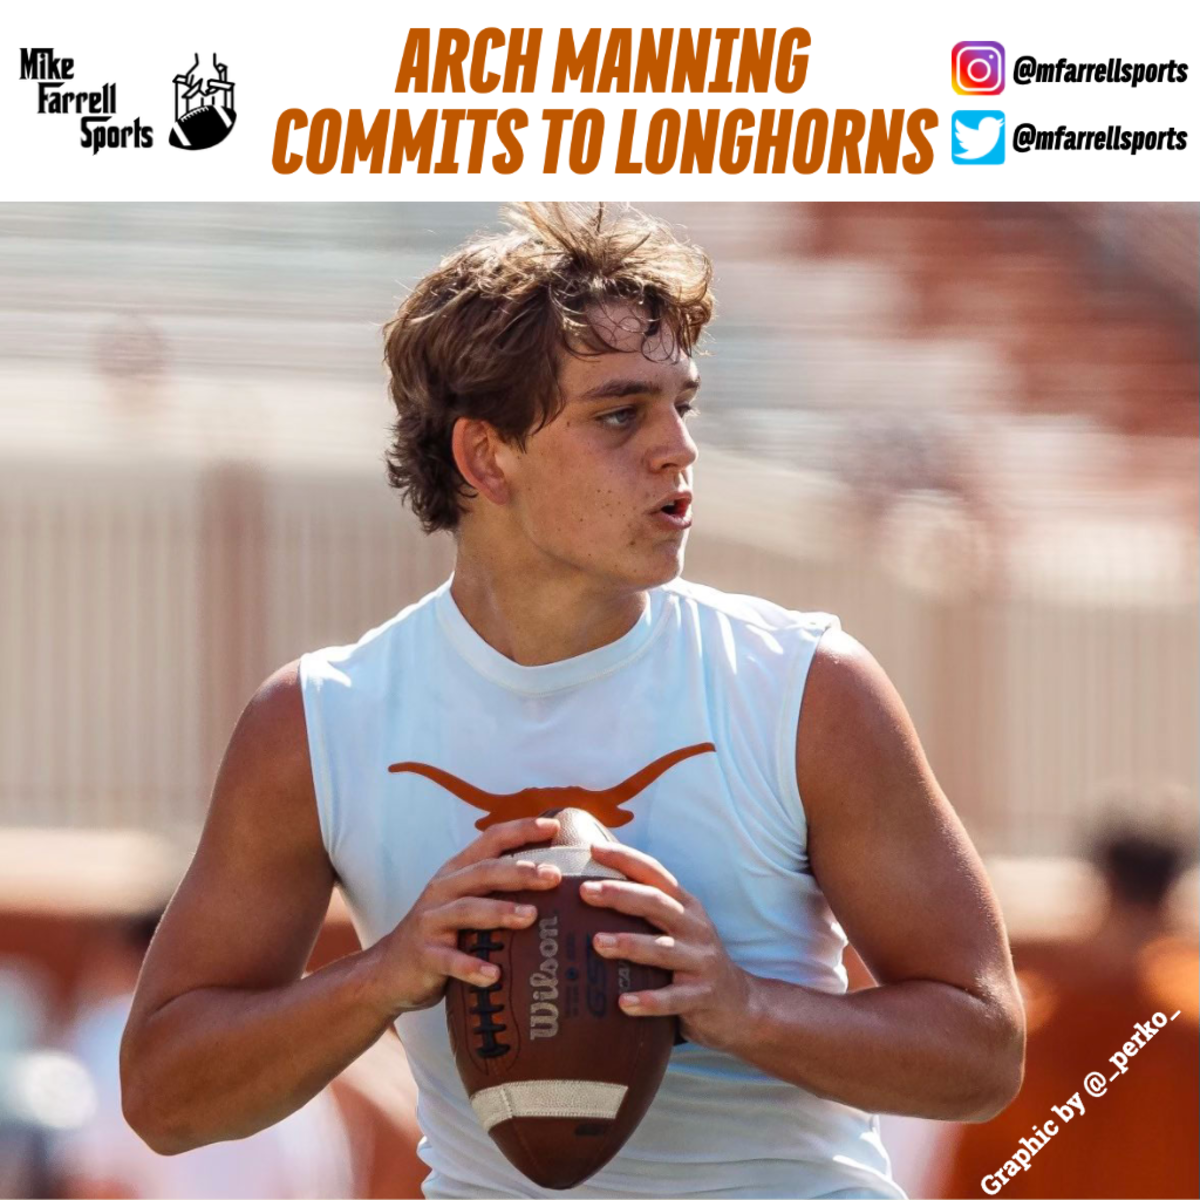 Commitment - Arch Manning